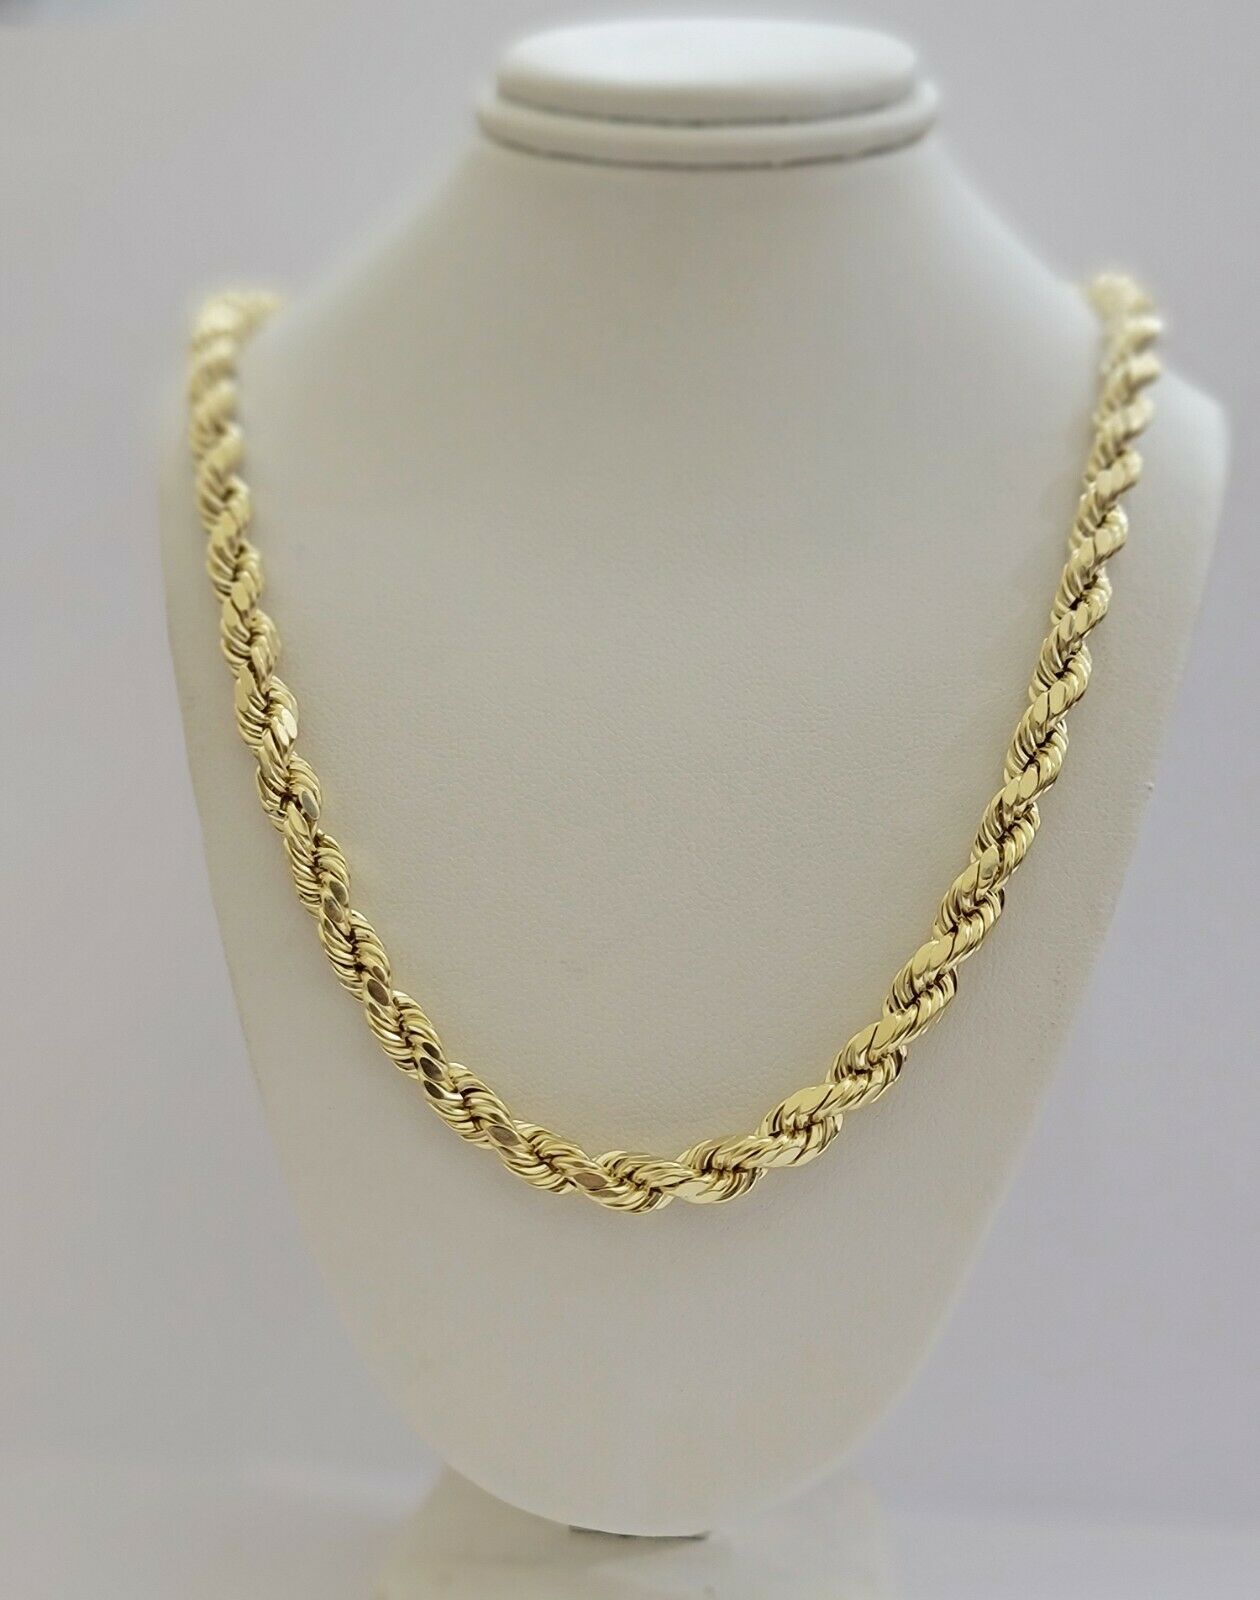 Real Gold 10K Rope Necklace Men' Chain 7mm 18-30 inch Yellow Gold Diamond Cuts 24 inch